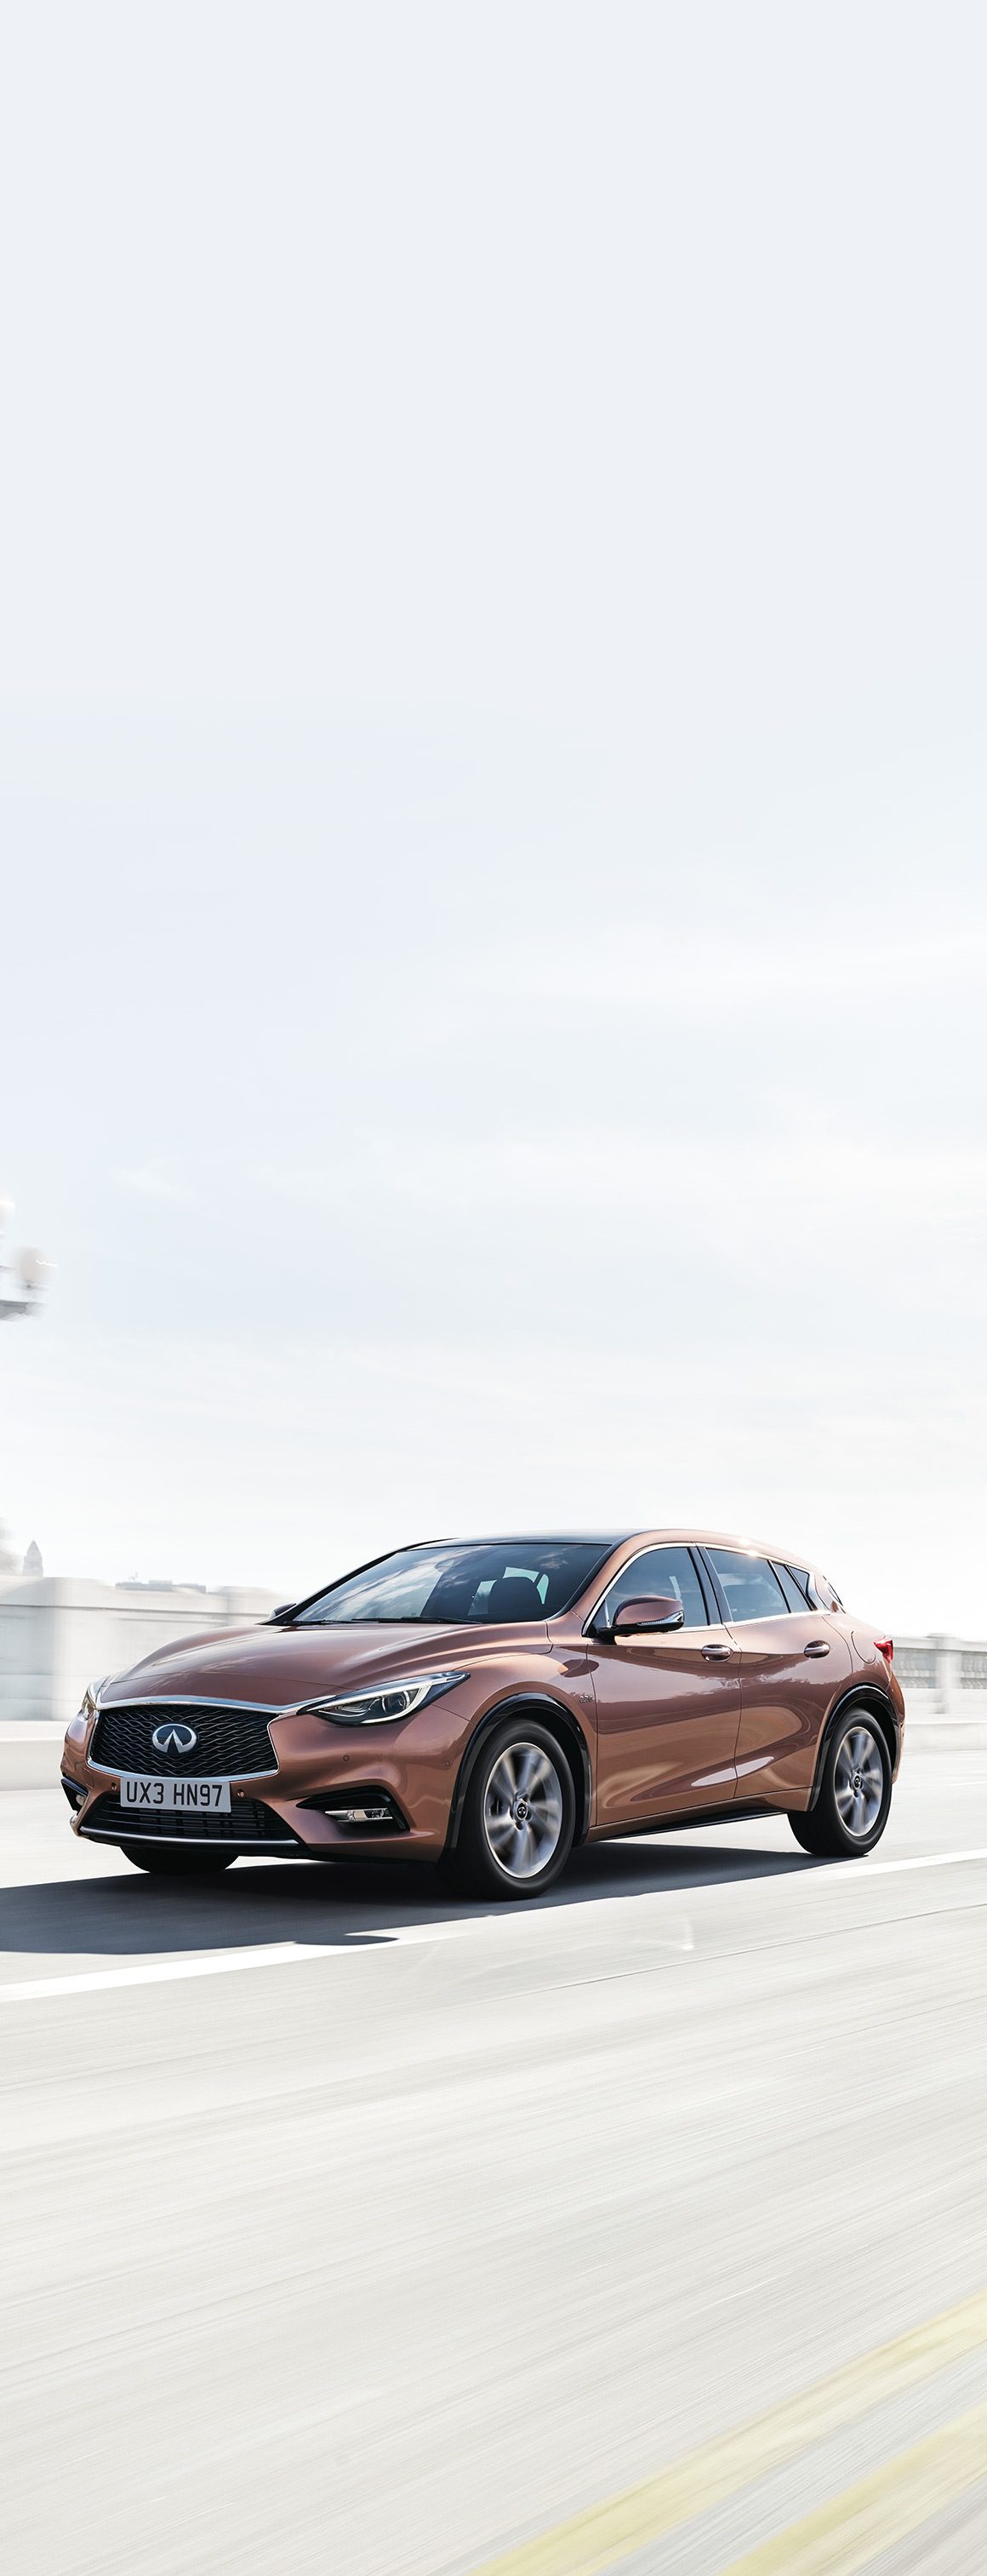 The Infiniti Q30 has arrived to shatter convention.